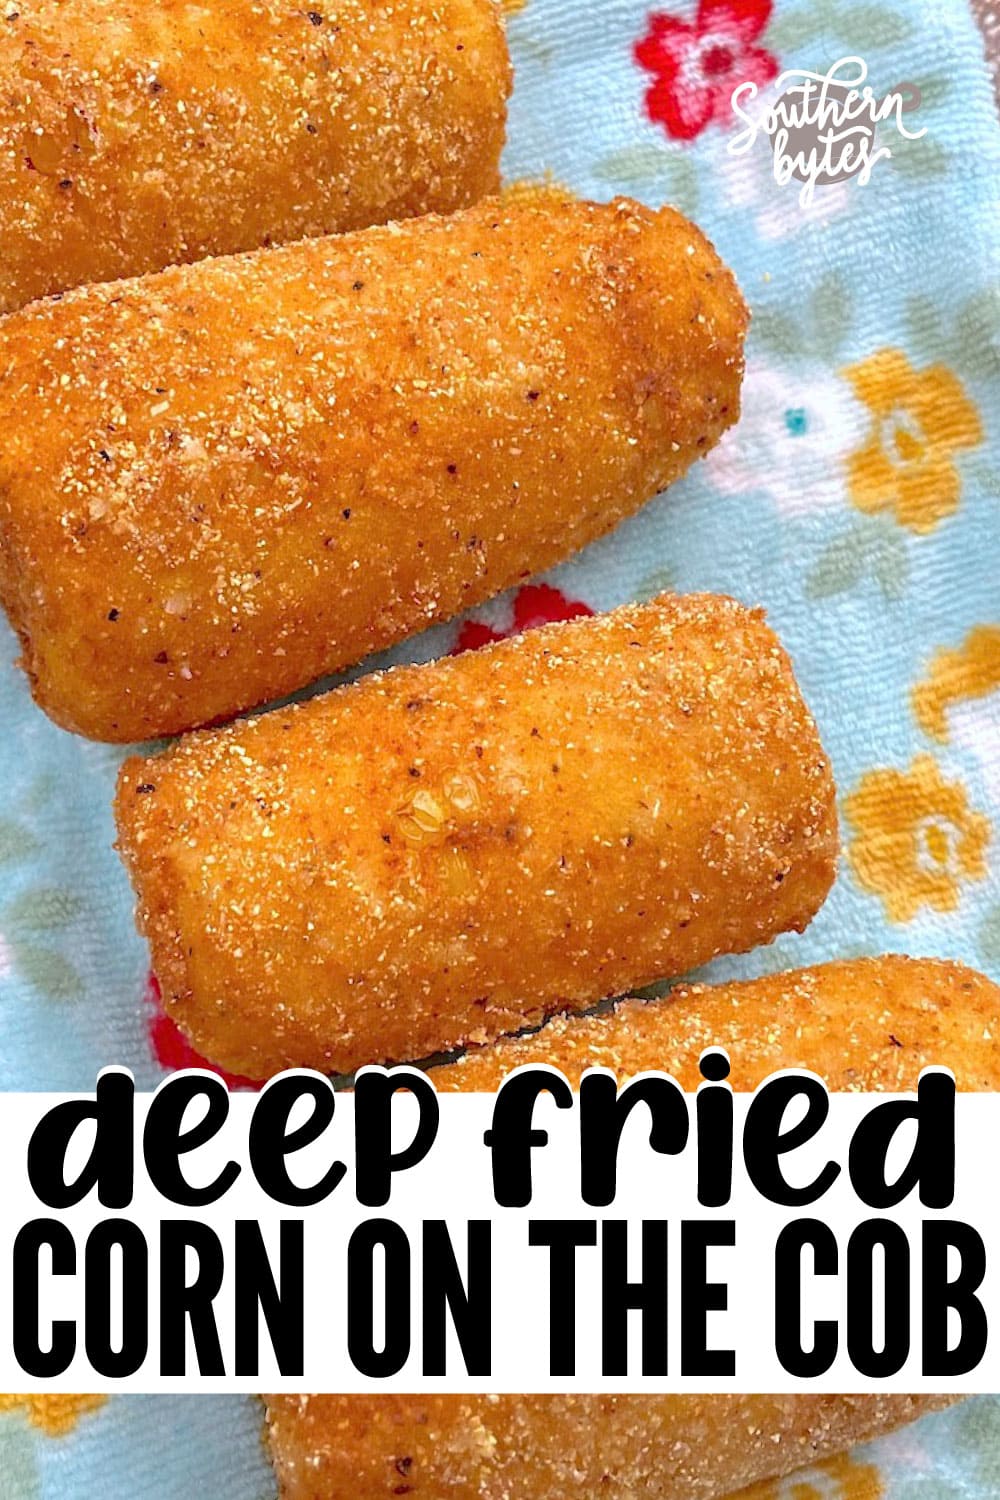 A pin image of four pieces of fried corn on the cob on a blue towel on a plate.